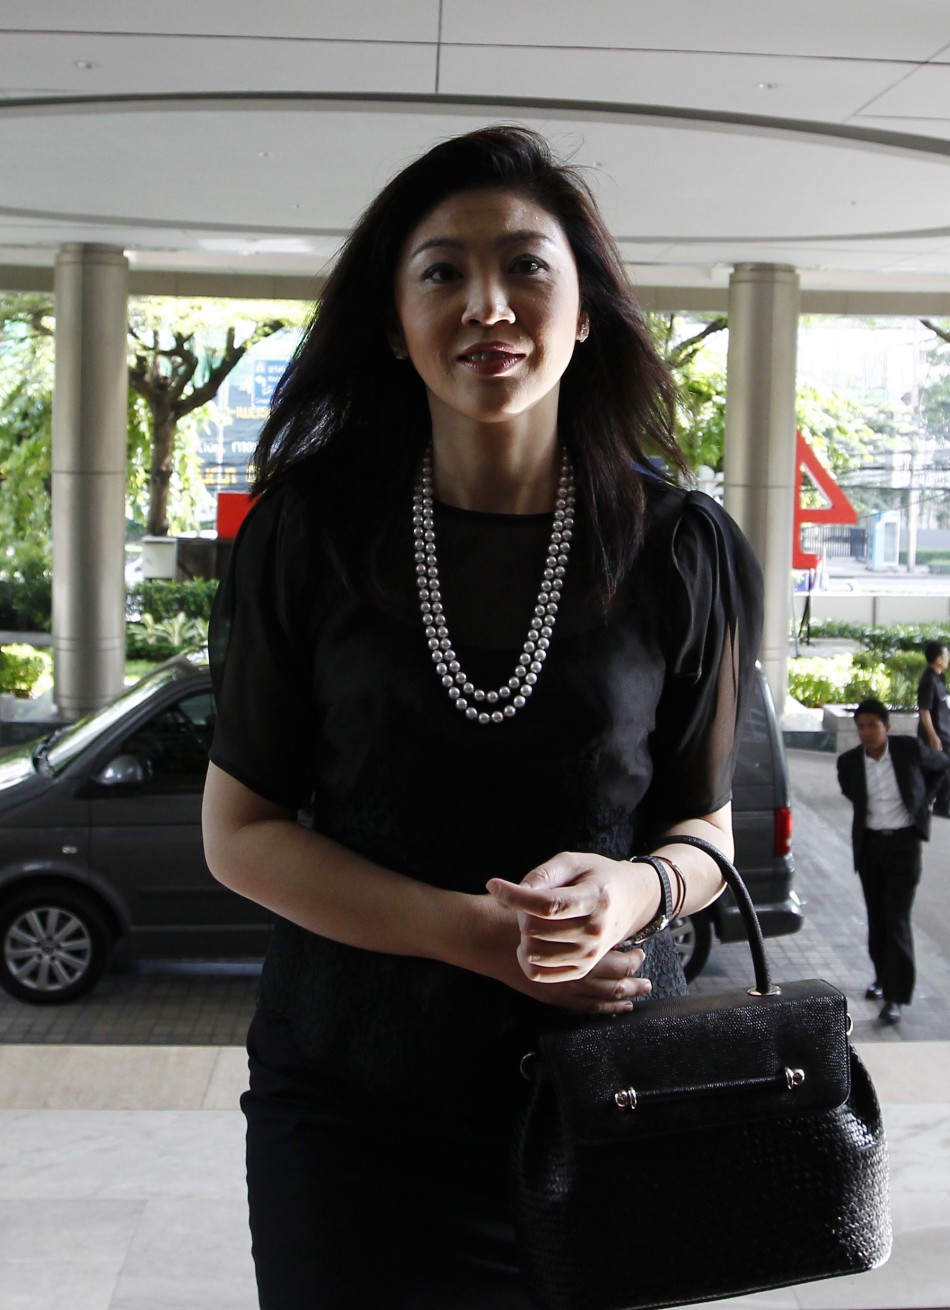 Thailands prime minister elect Yingluck arrives for work at the headquarters of her Puea Thai Party in Bangkok